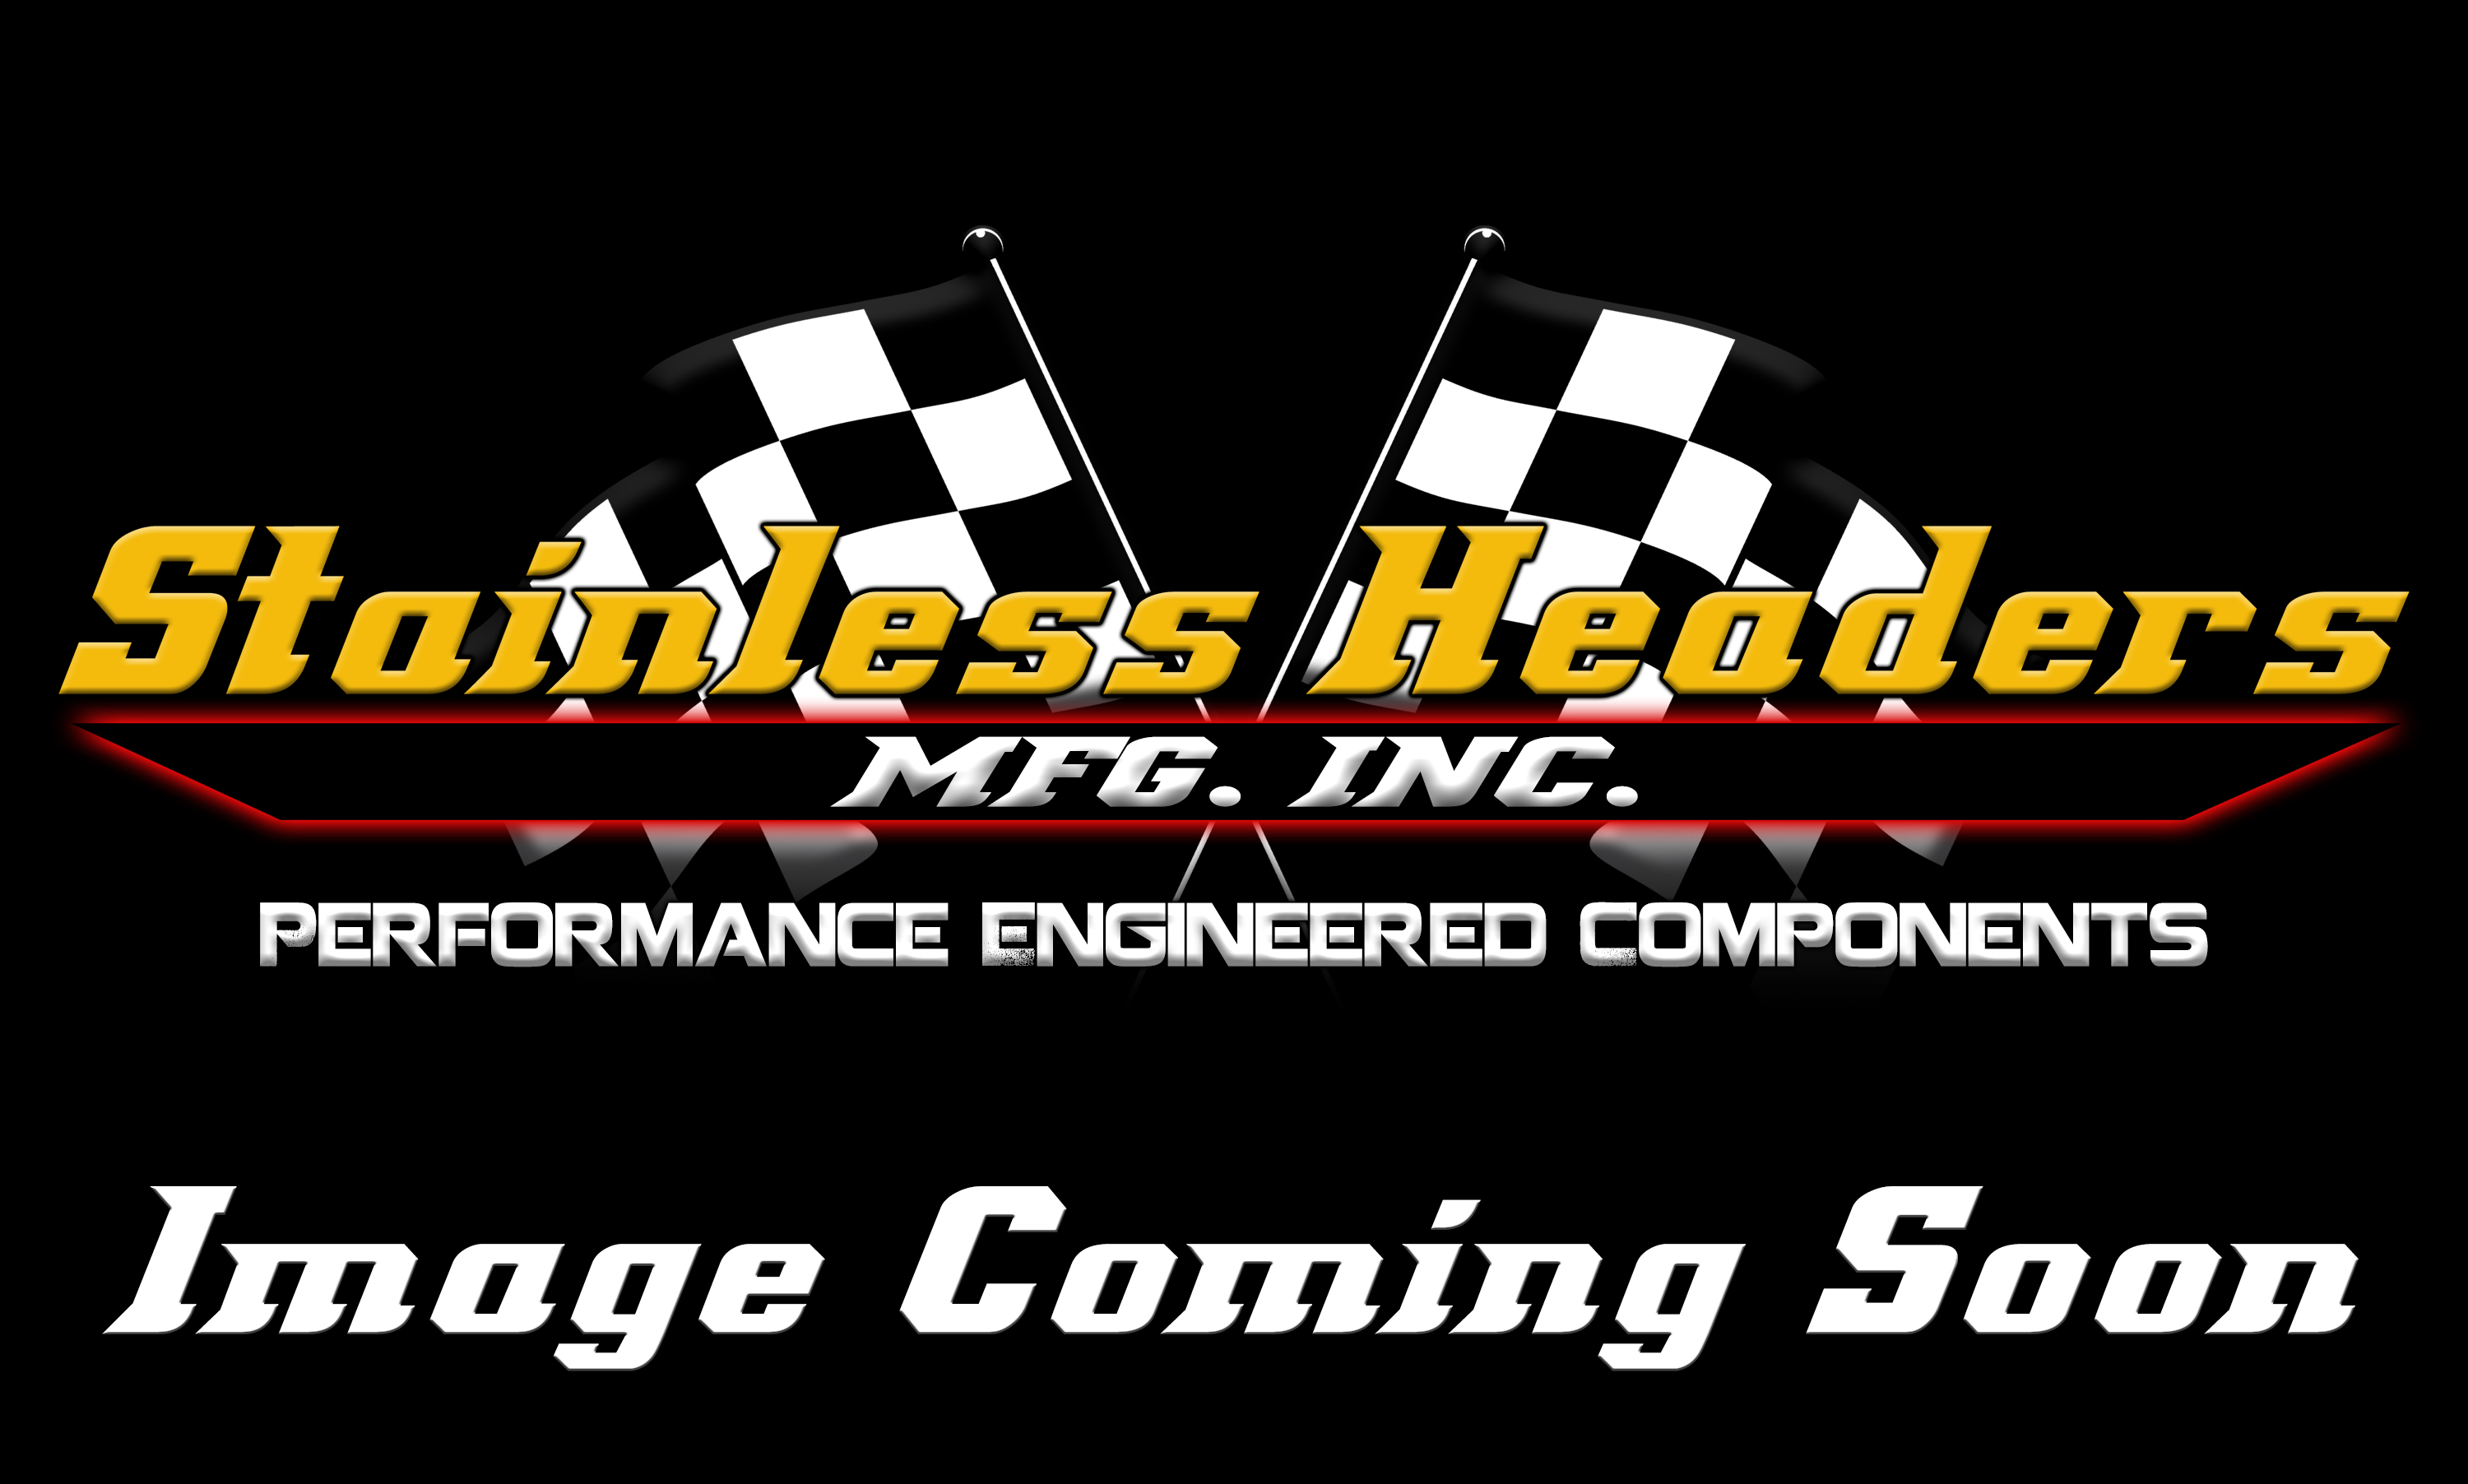 CompTurbo Technologies - CTR55118S-118110 Oil-Less 3.0 Turbocharger (2800 HP)